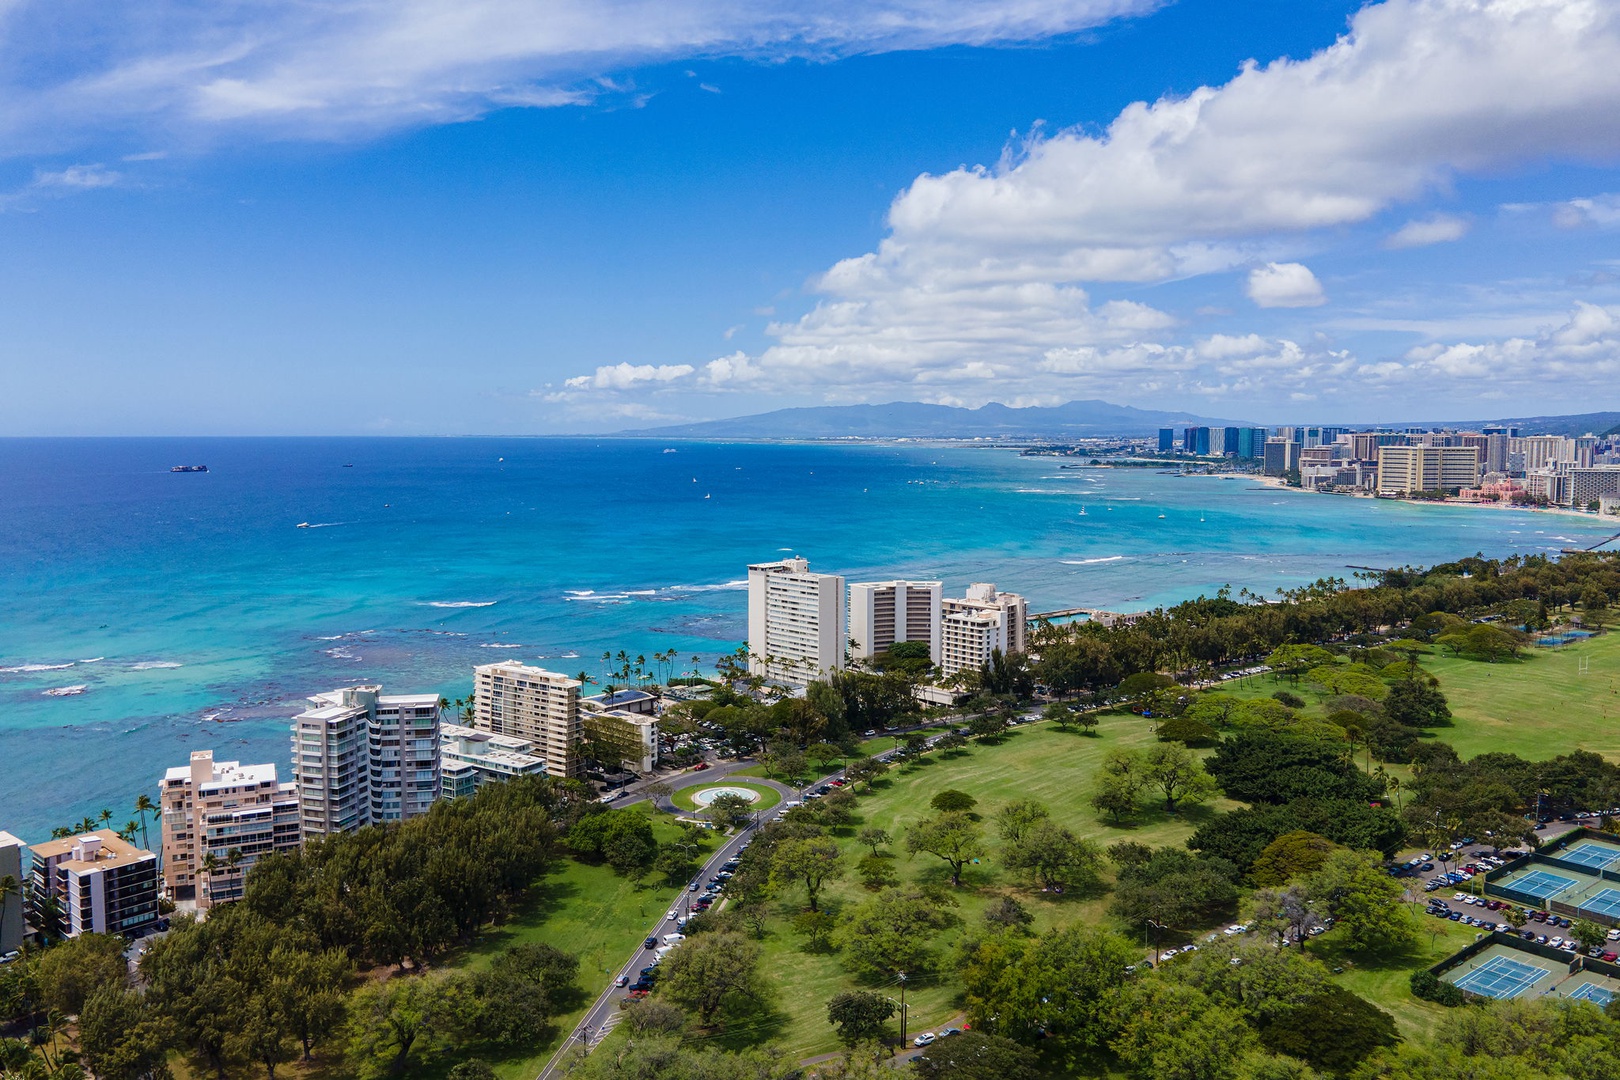 Honolulu Vacation Rentals, Colony Surf Getaway - Tranquil blues of the ocean and the lush condo community.